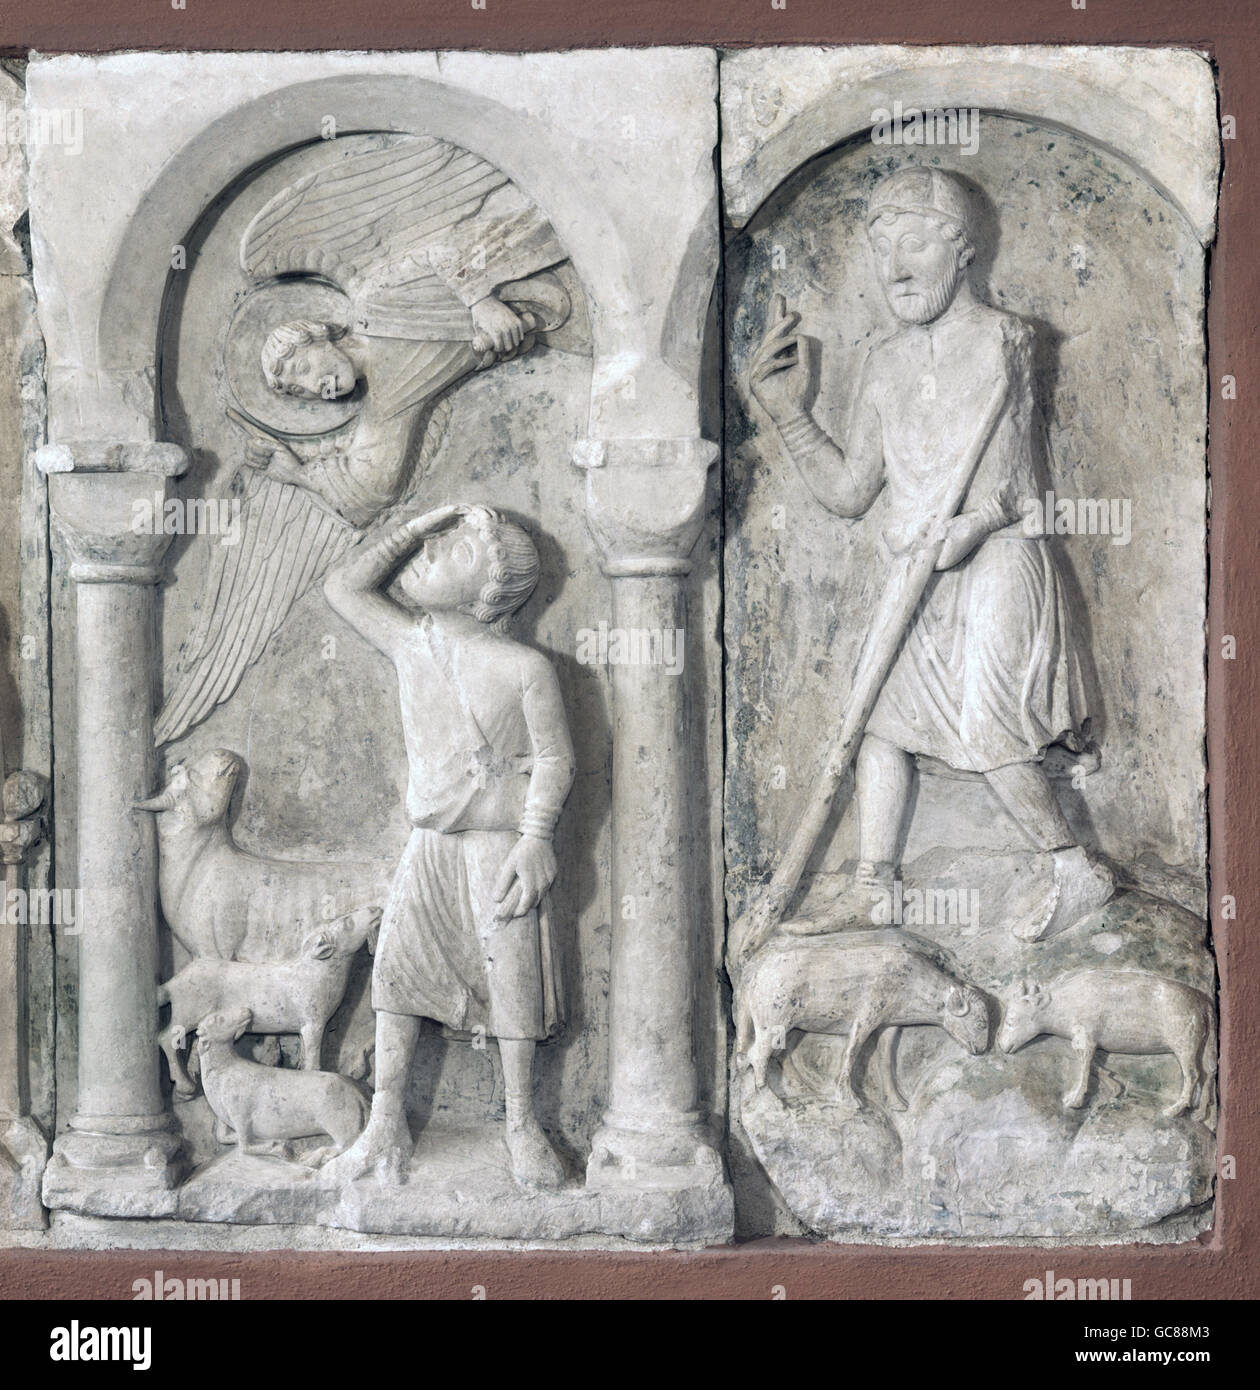 fine arts, sculpture, relief, annunciation to the shepherds, Cologne, mid 12th century, stone, Rhenian national museum, Bonn, Germany, Stock Photo